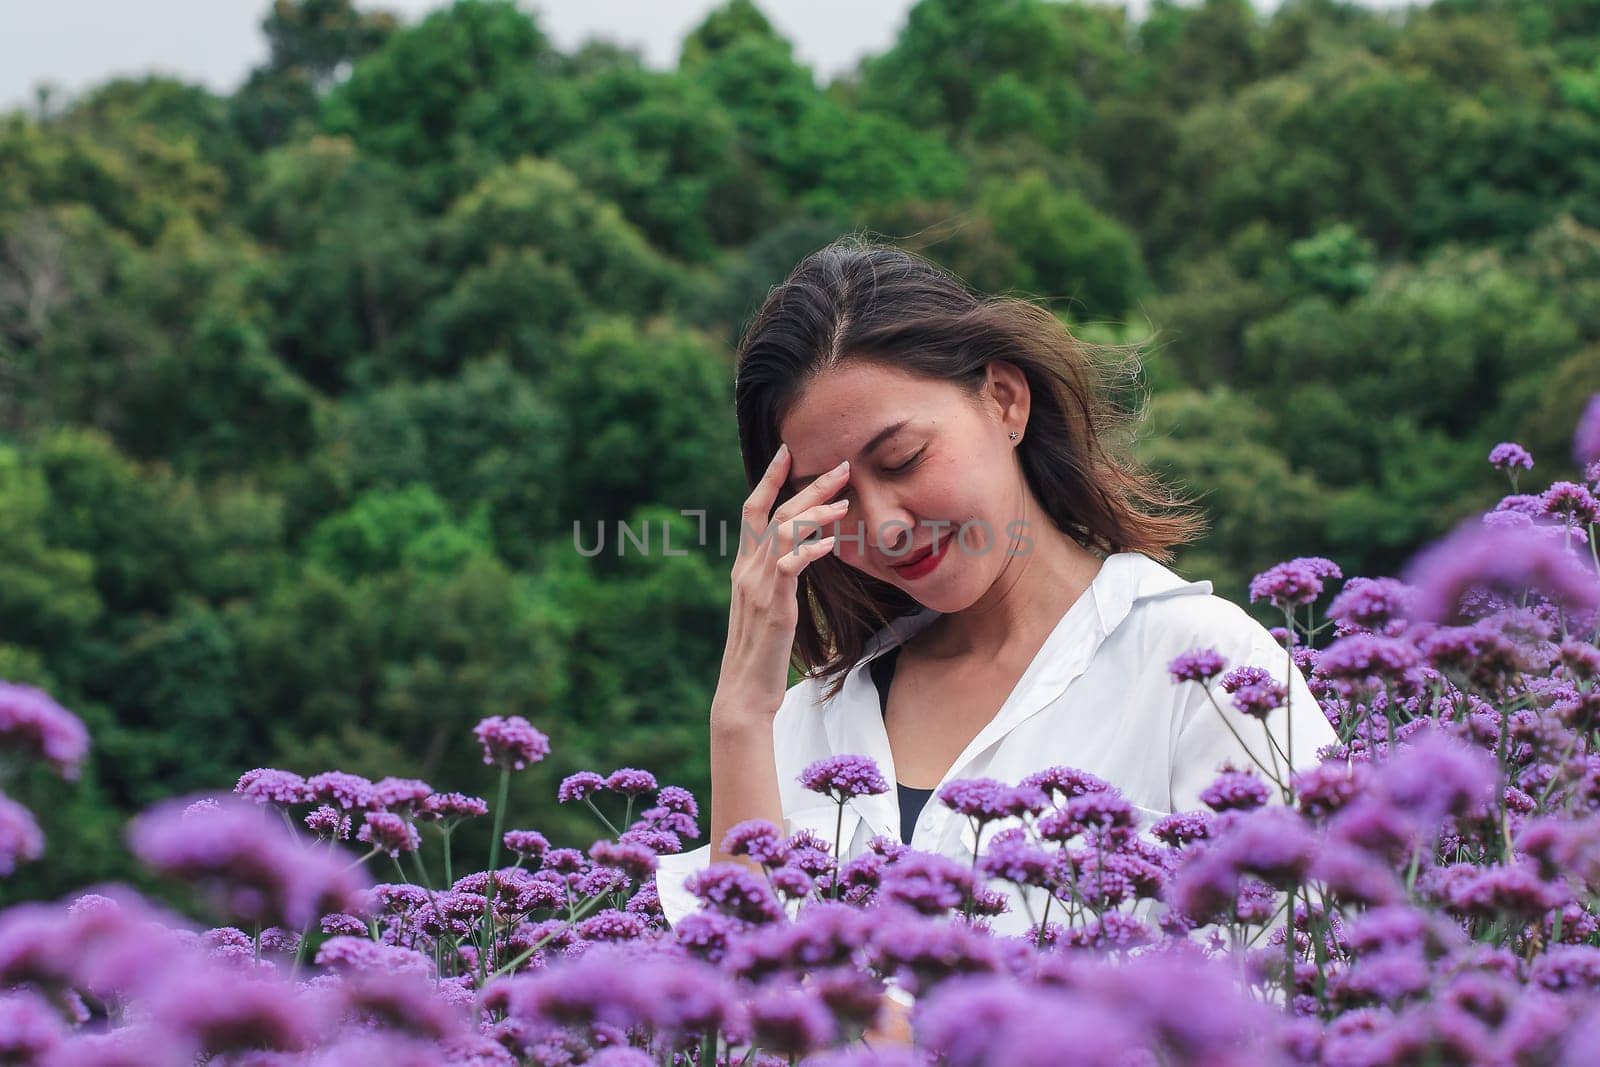 Women in the Verbena field are blooming and beautiful in the rainy season.